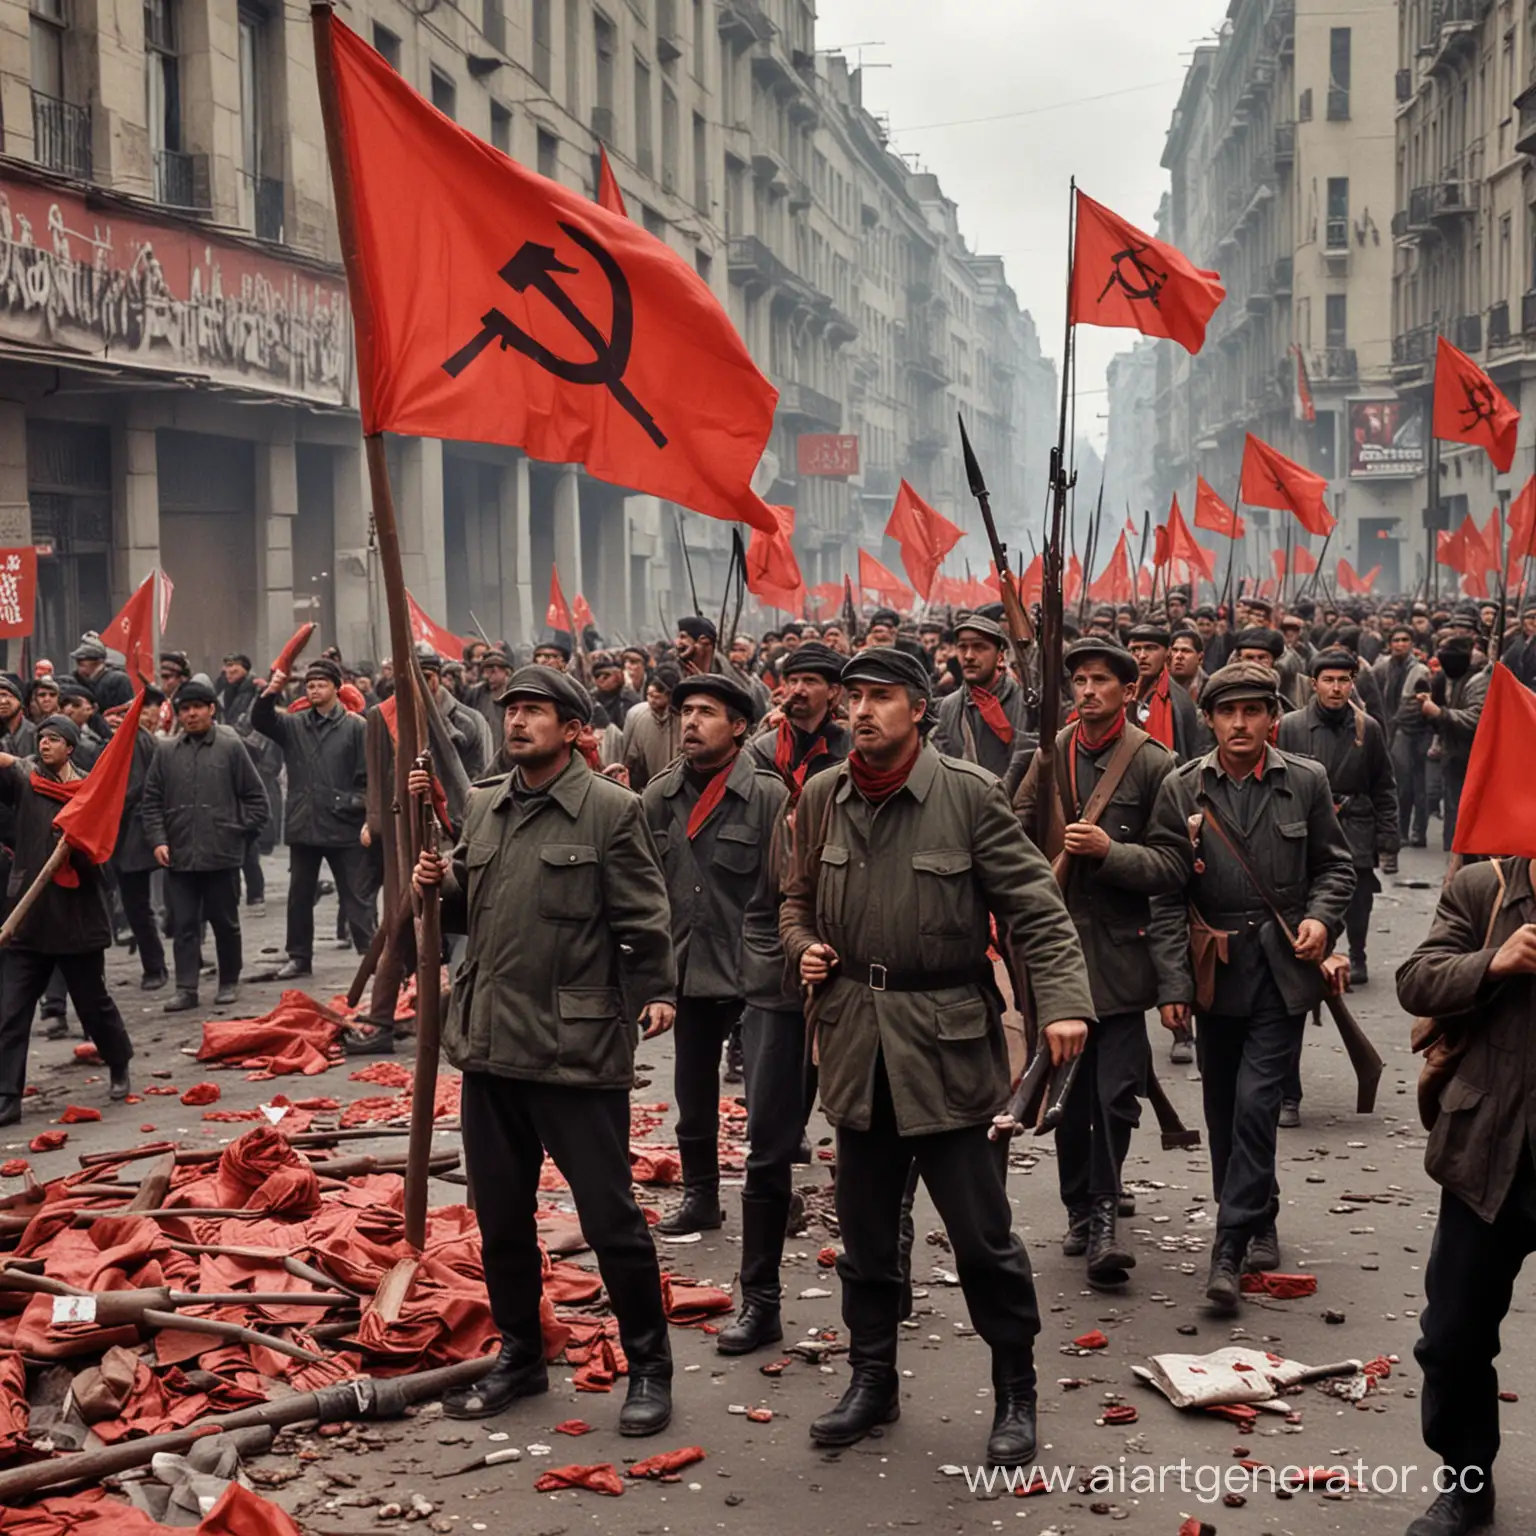 Communist-Party-Members-Engaging-in-Class-Struggle-at-the-Barricades